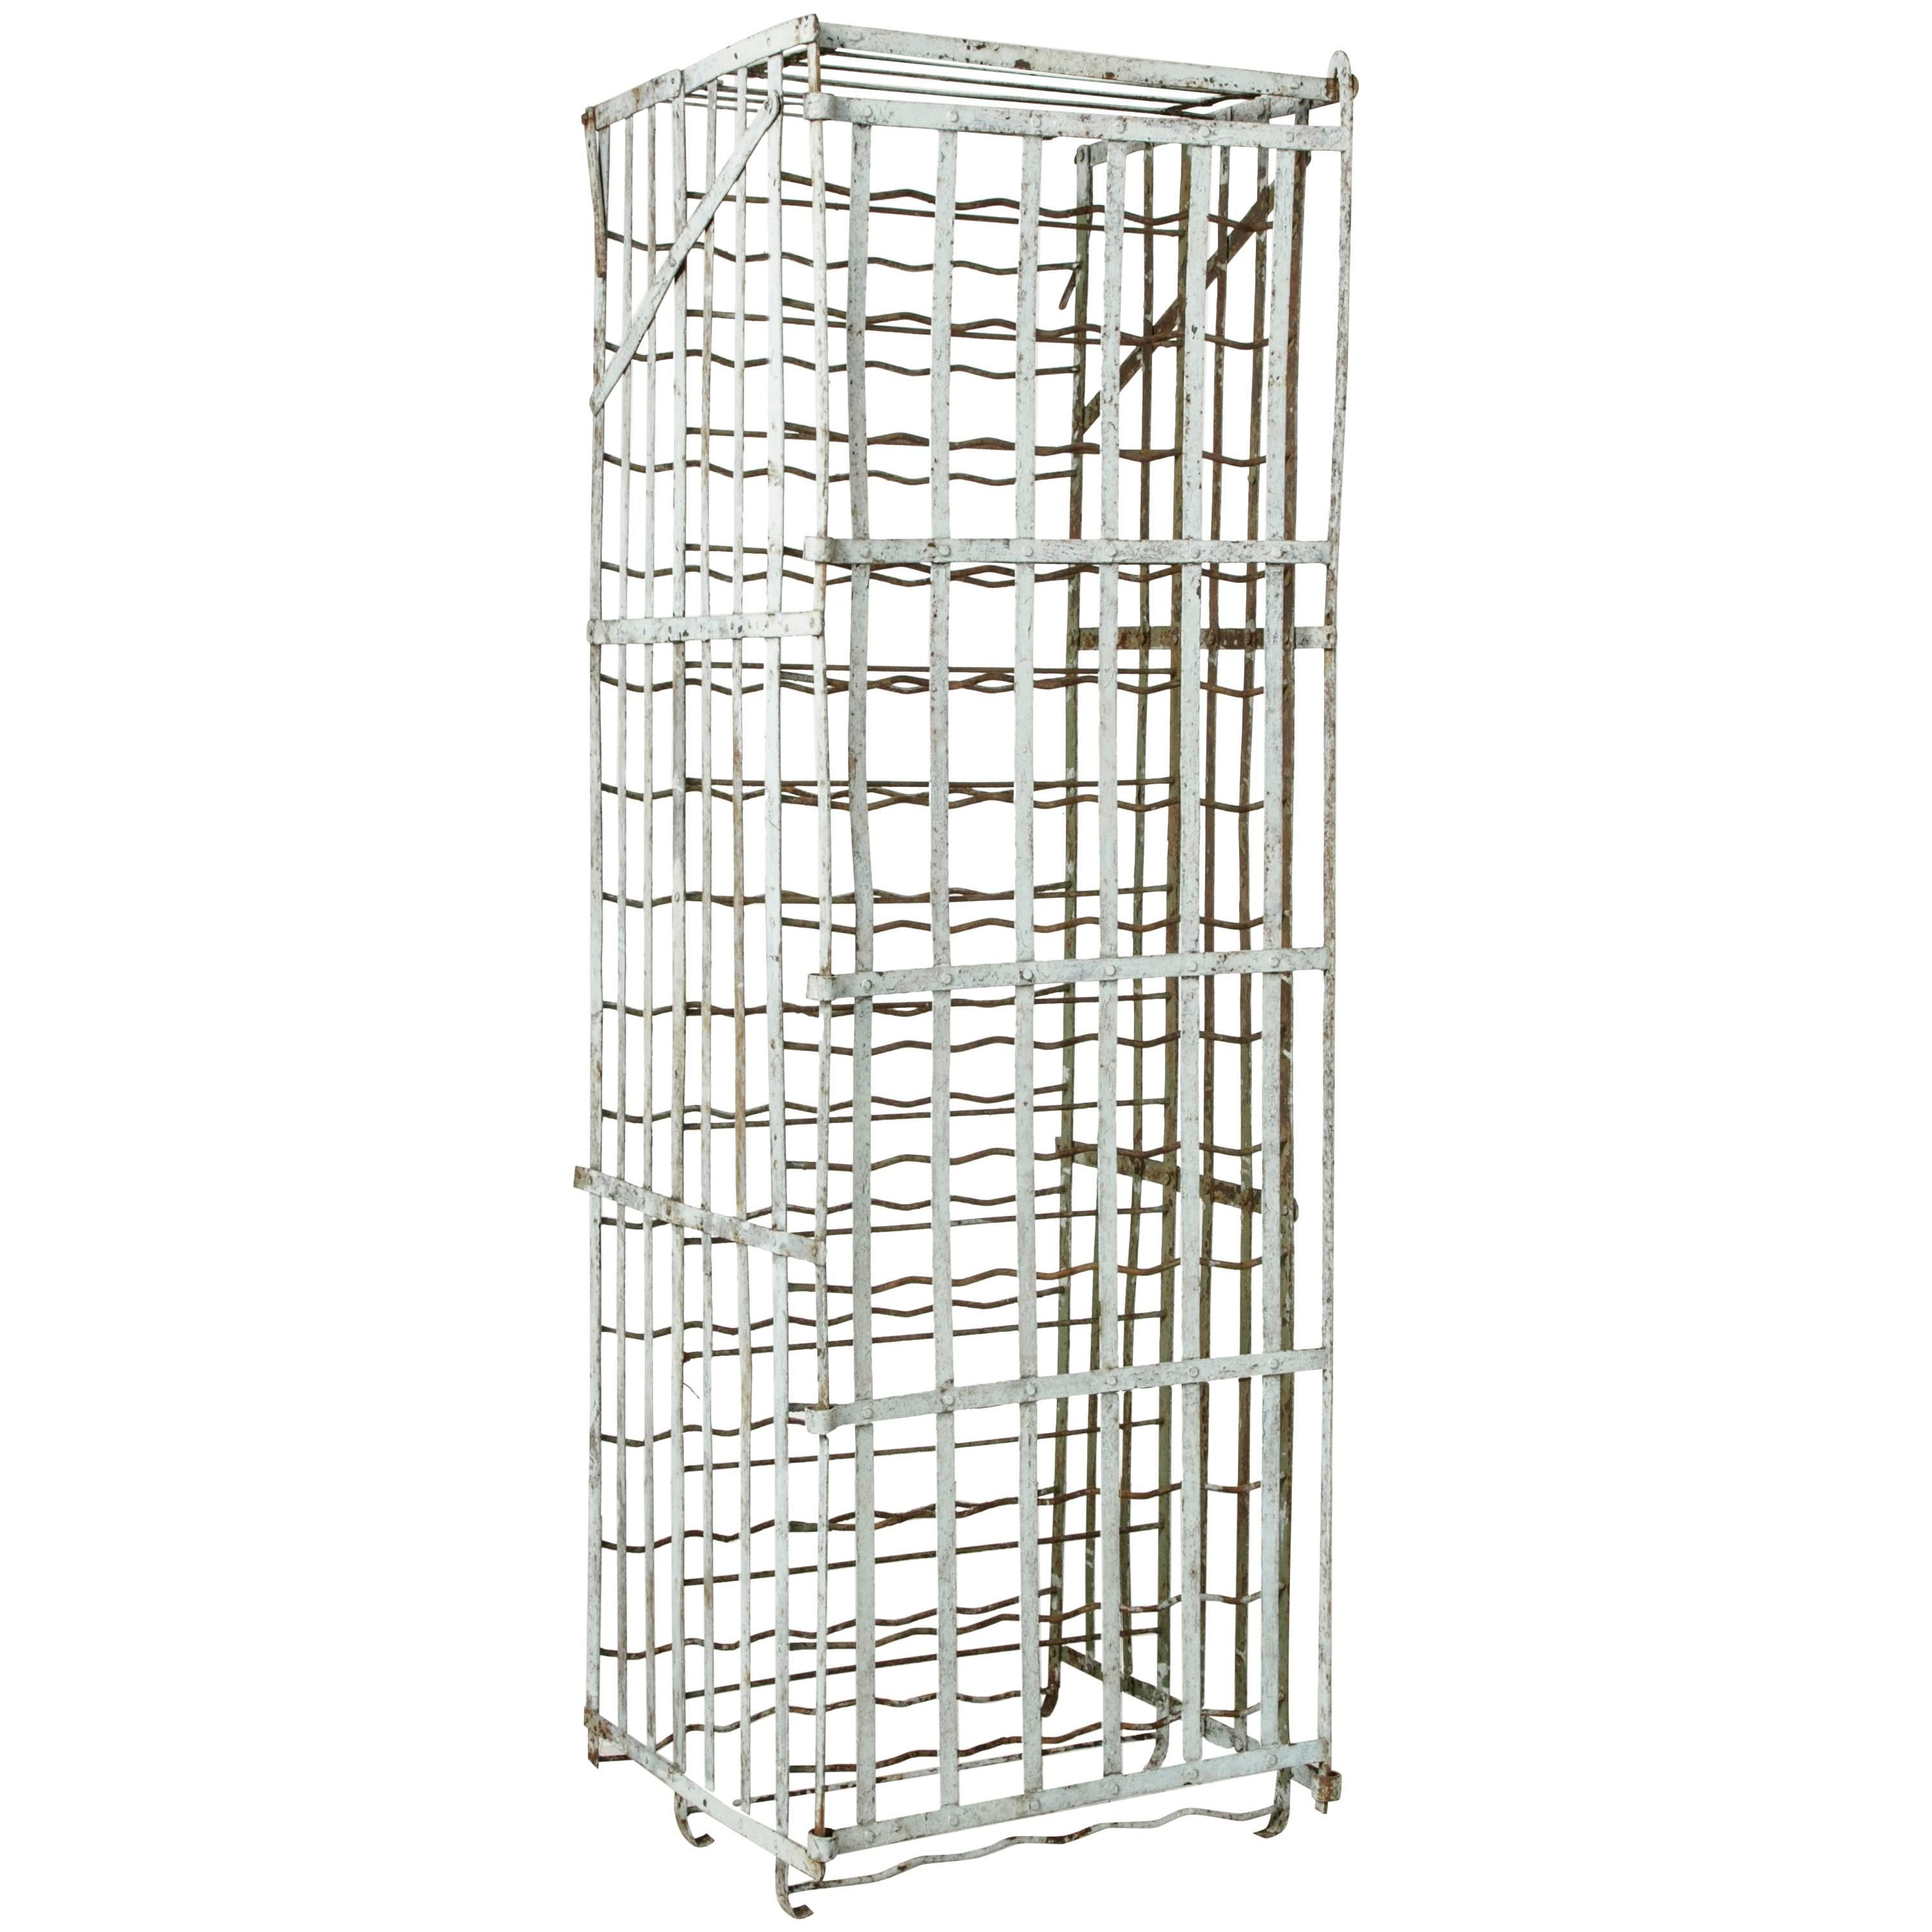 Early 20th Century French Riveted Iron Wine Cage or Wine Rack